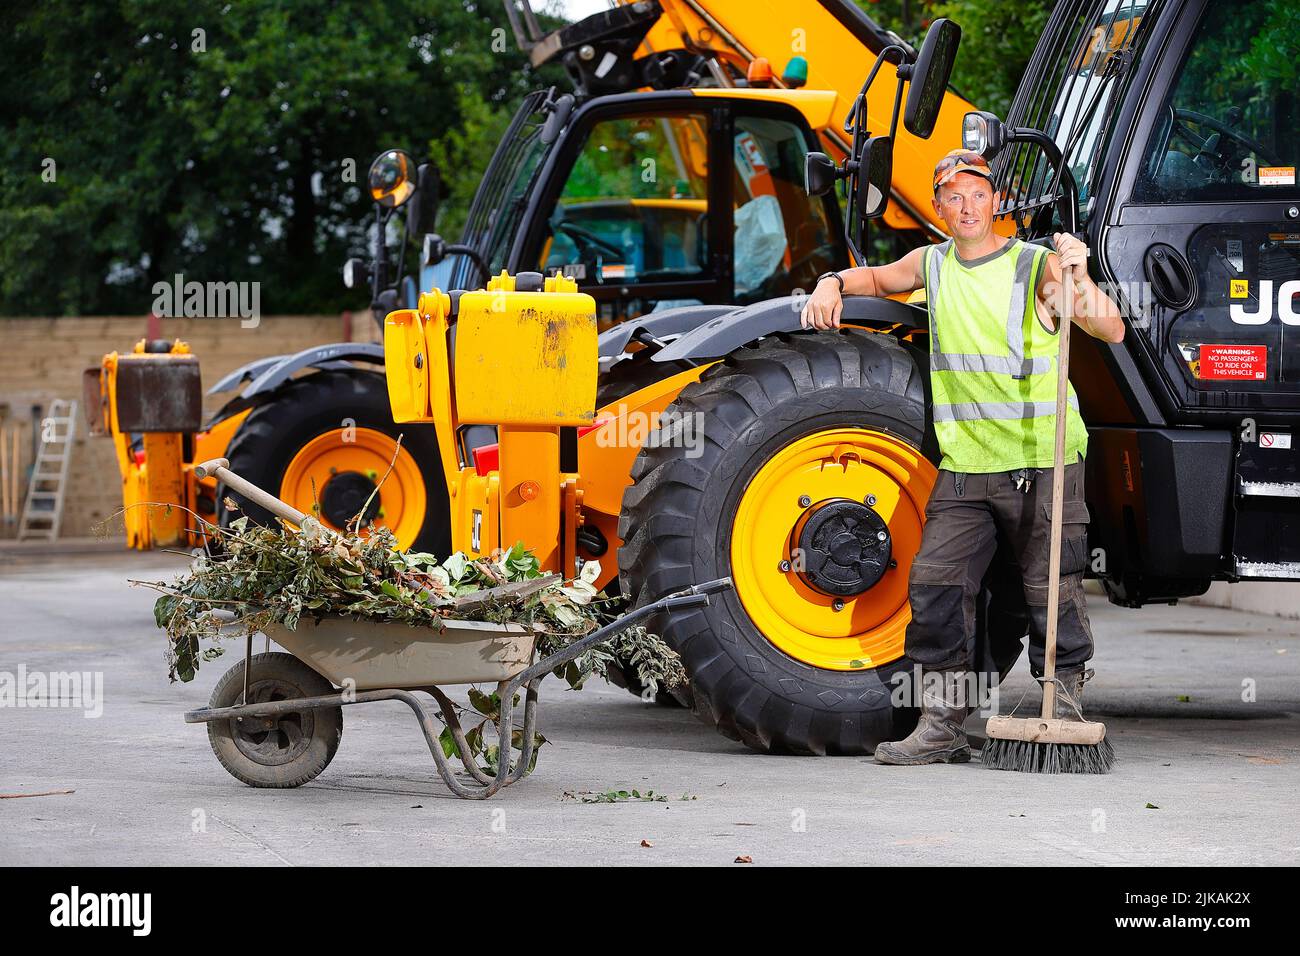 A yard manager posing with a wheelbarrow and yard broom next to a JCB Telehandler at a plant hire company Stock Photo